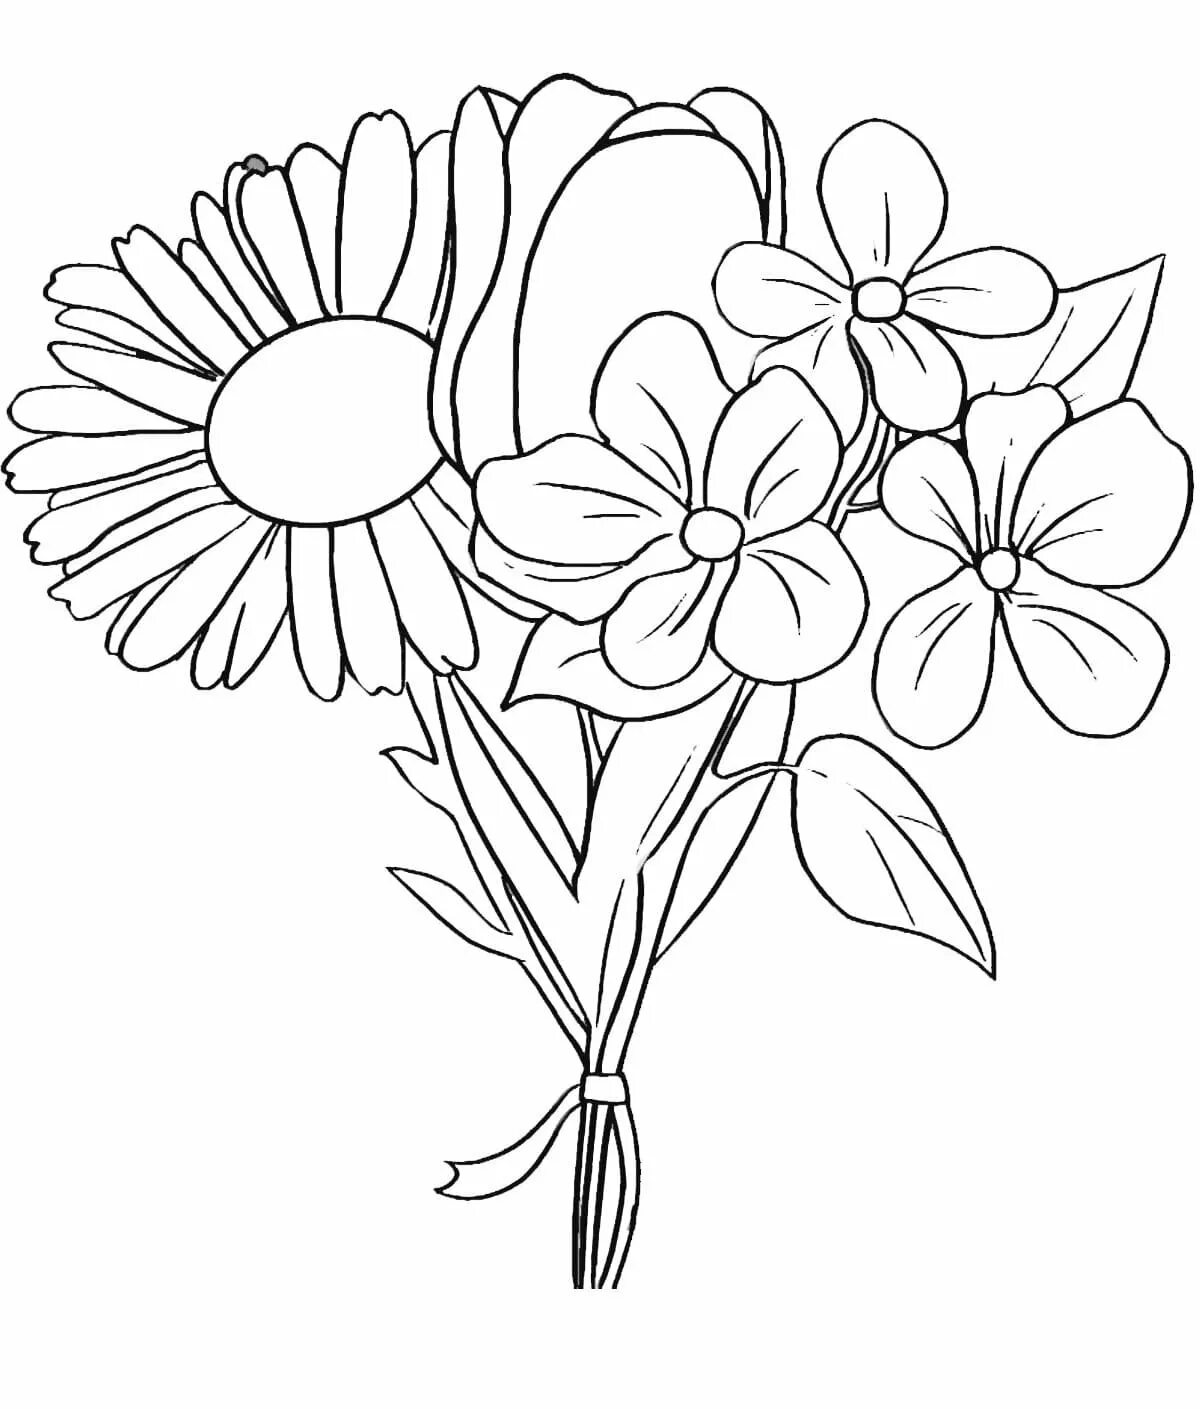 Cute bouquet coloring for mom